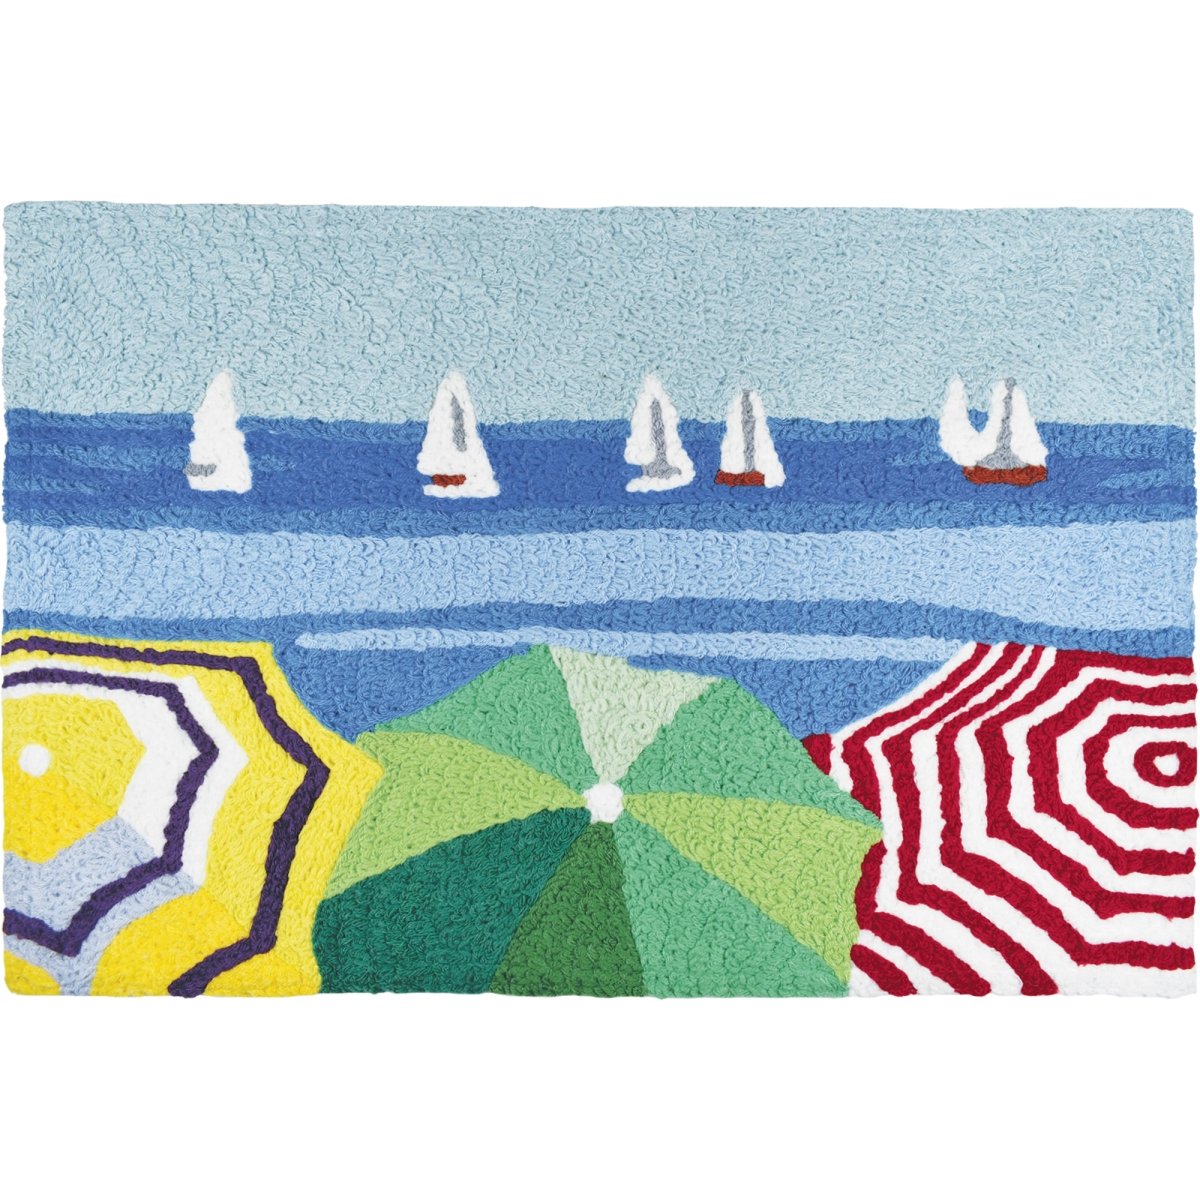 Jb-hd021 20 X 30 In. Sailboats In The Distance Rug